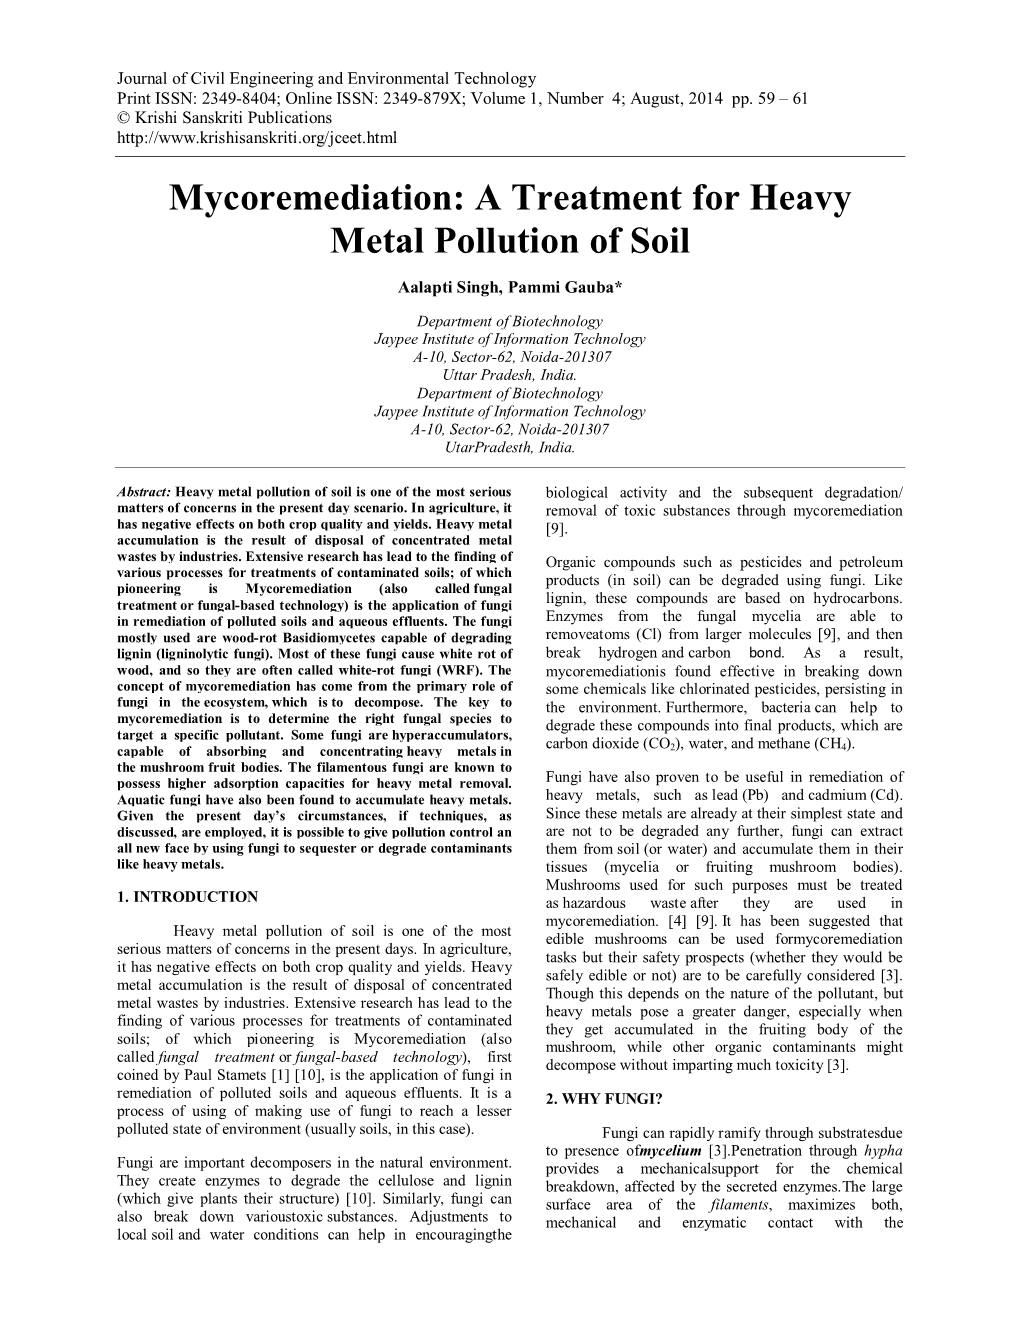 Mycoremediation: a Treatment for Heavy Metal Pollution of Soil